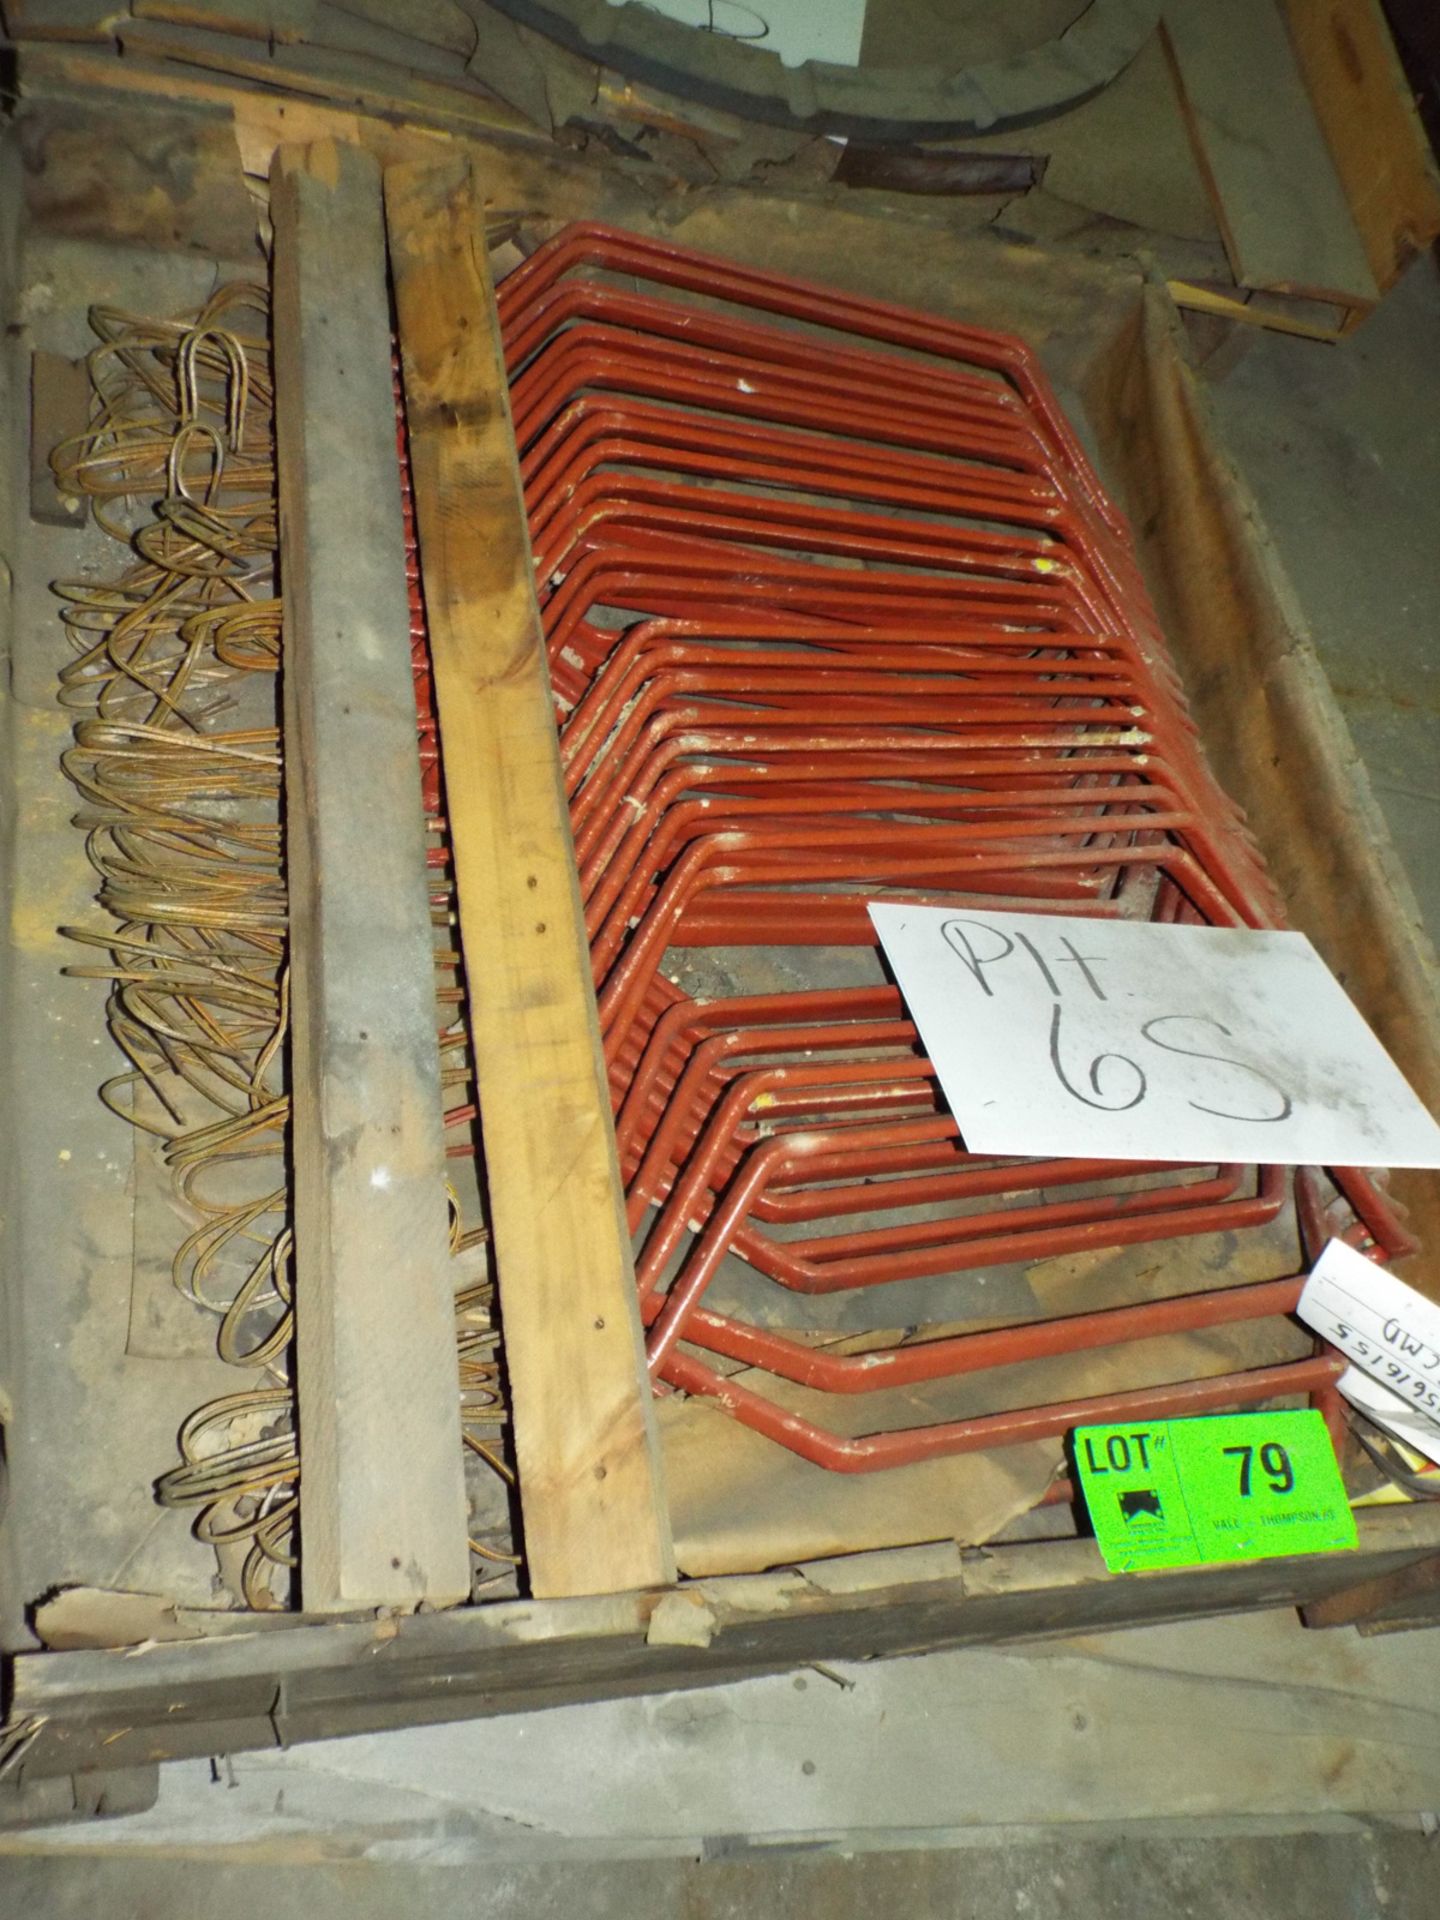 LOT/ CONTENTS OF SKID - STATOR COILS (PLT 6S)